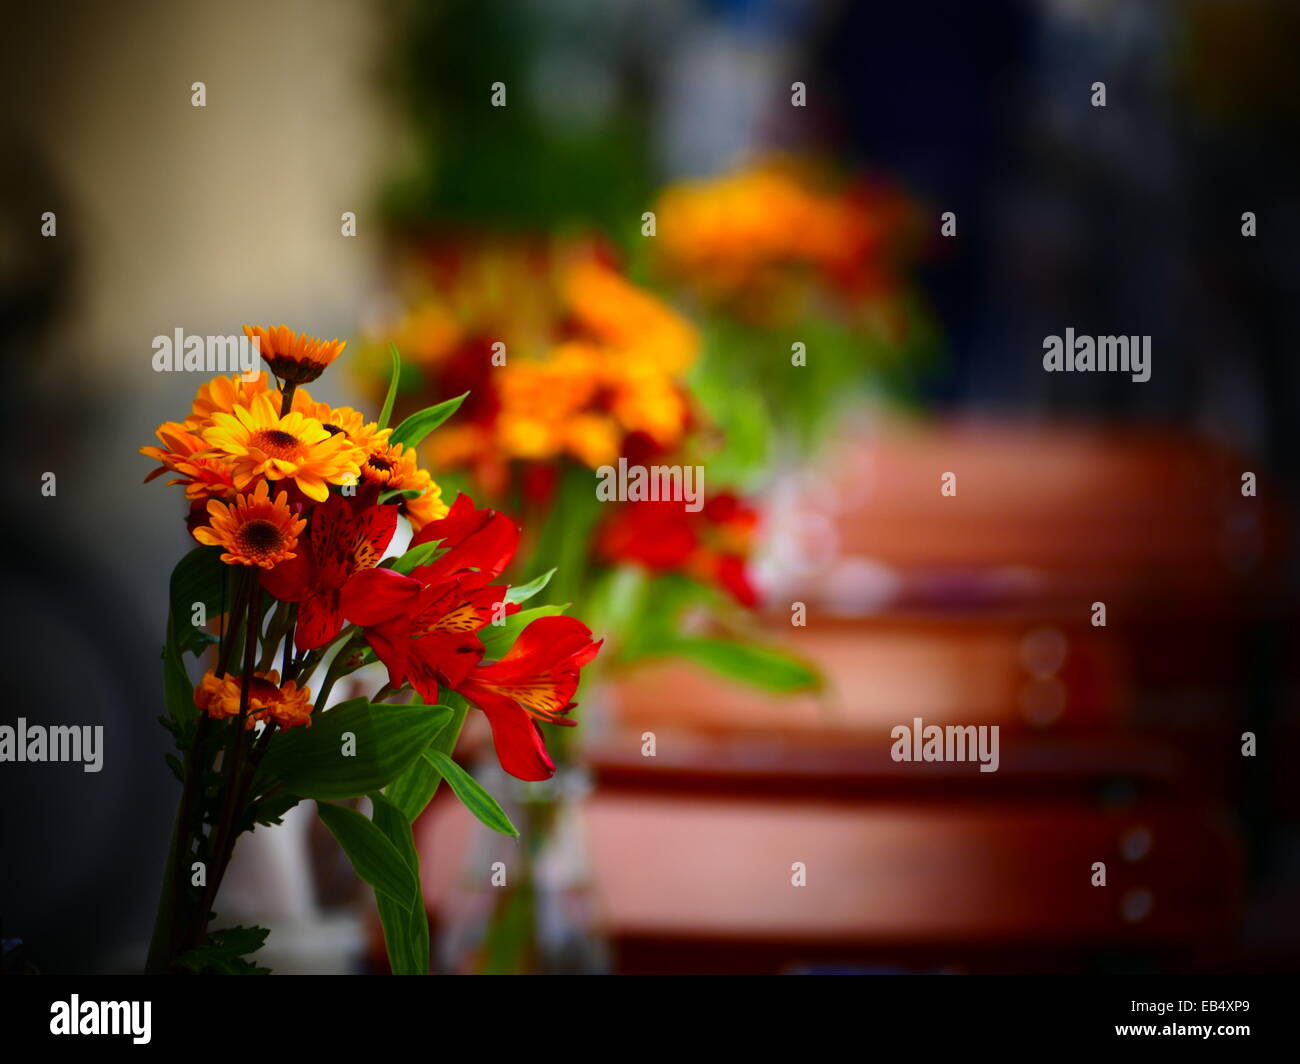 Bunch of flowers decorated on restaurant table Stock Photo